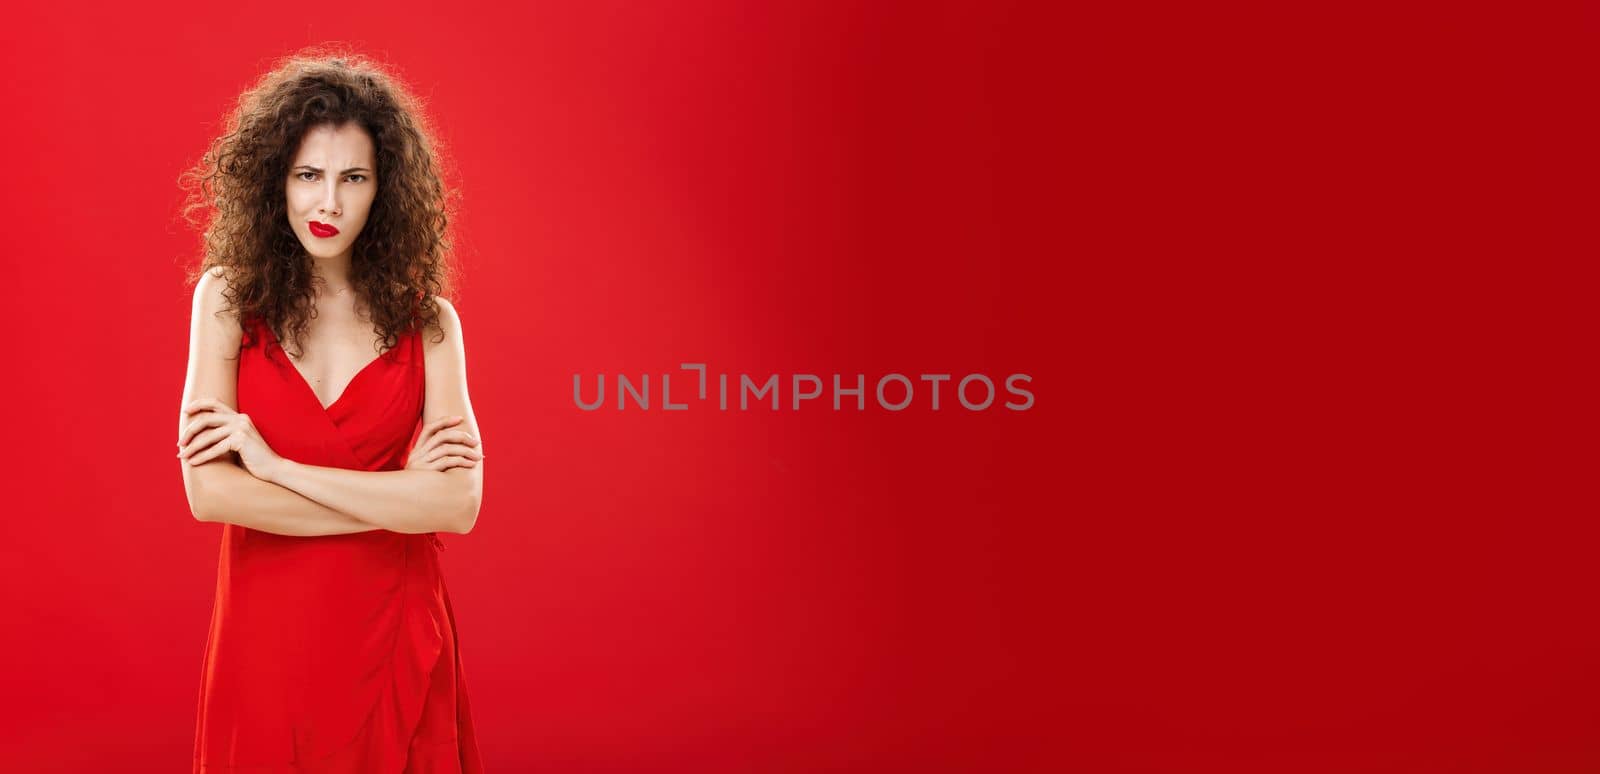 Portrait of intense thoughtful moody woman with curly hairstyle. frowning smirking looking from under forehead crossing arms against chest in offended and defensive pose over red background.